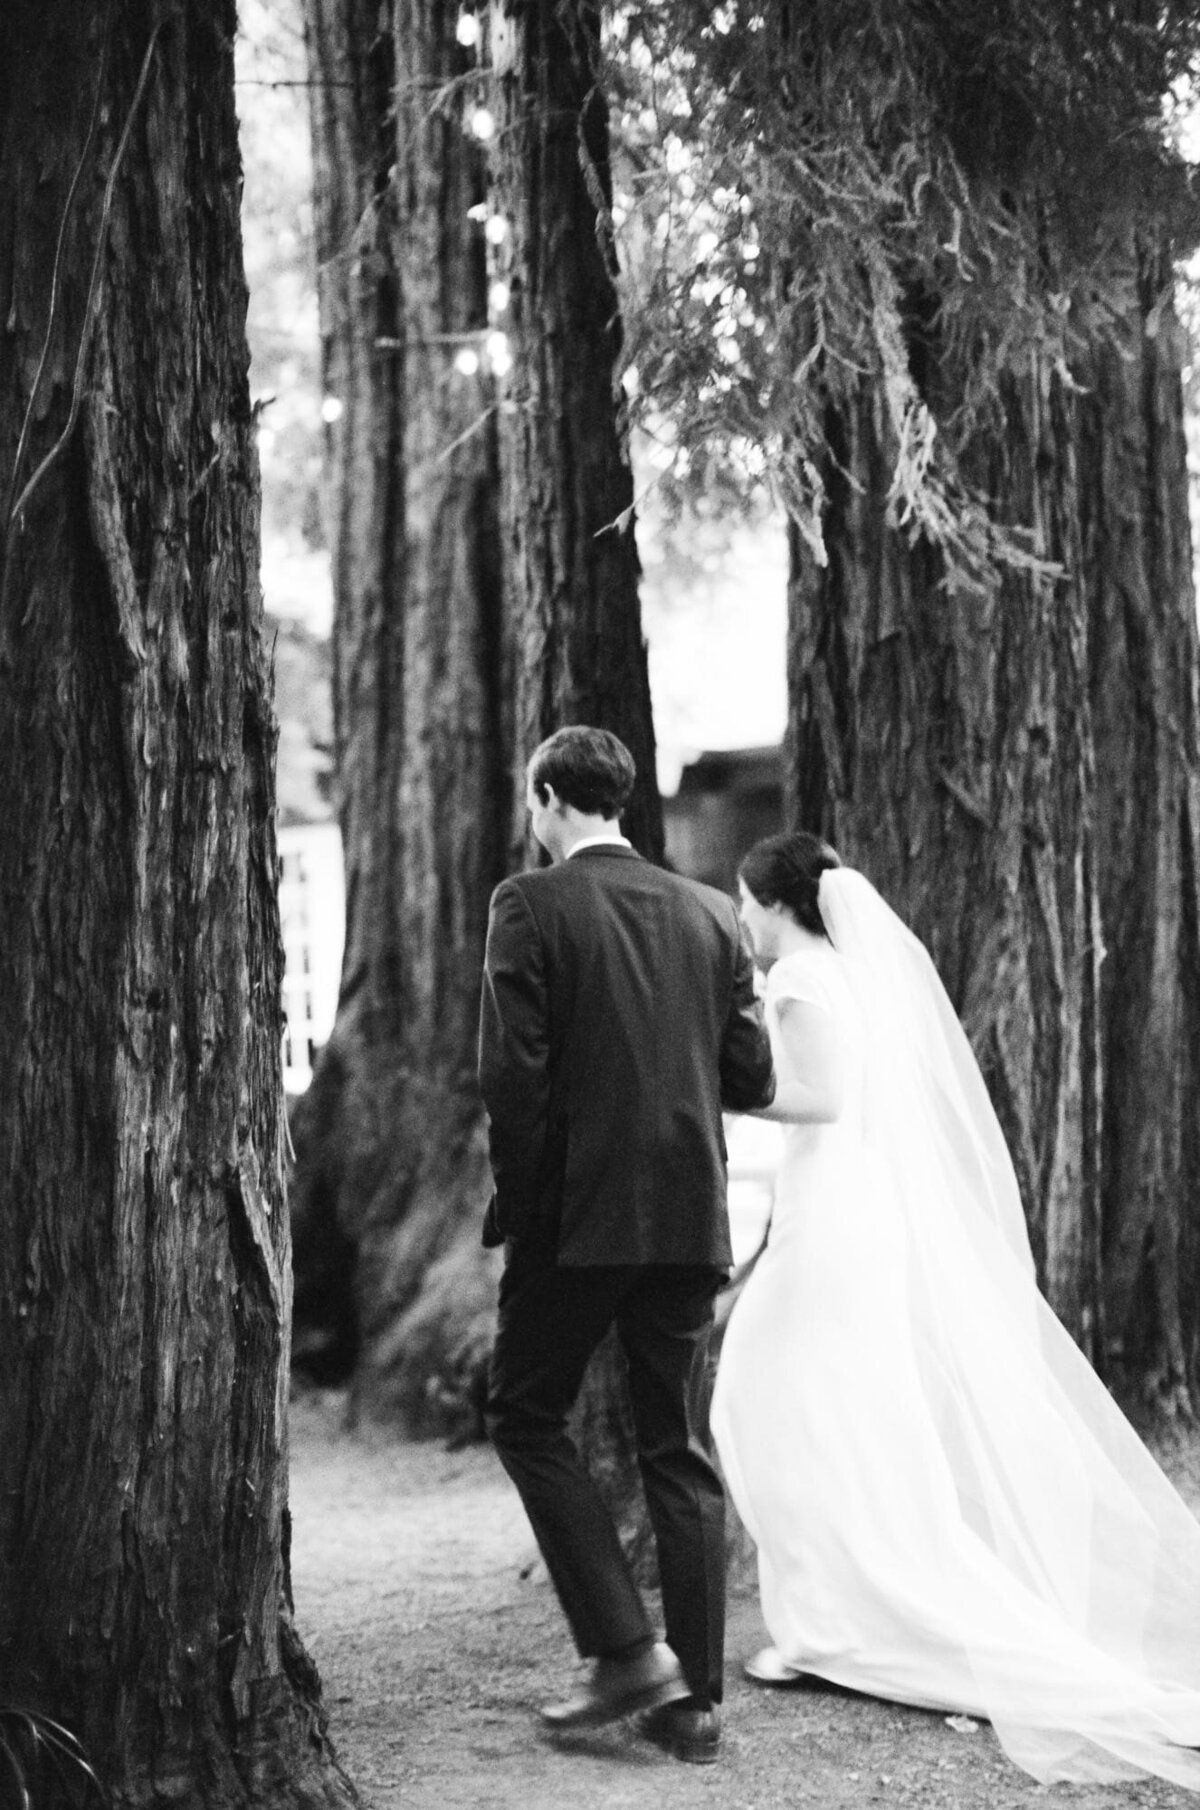 Newly married couple "elope" into the woods after a delightful forest wedding.